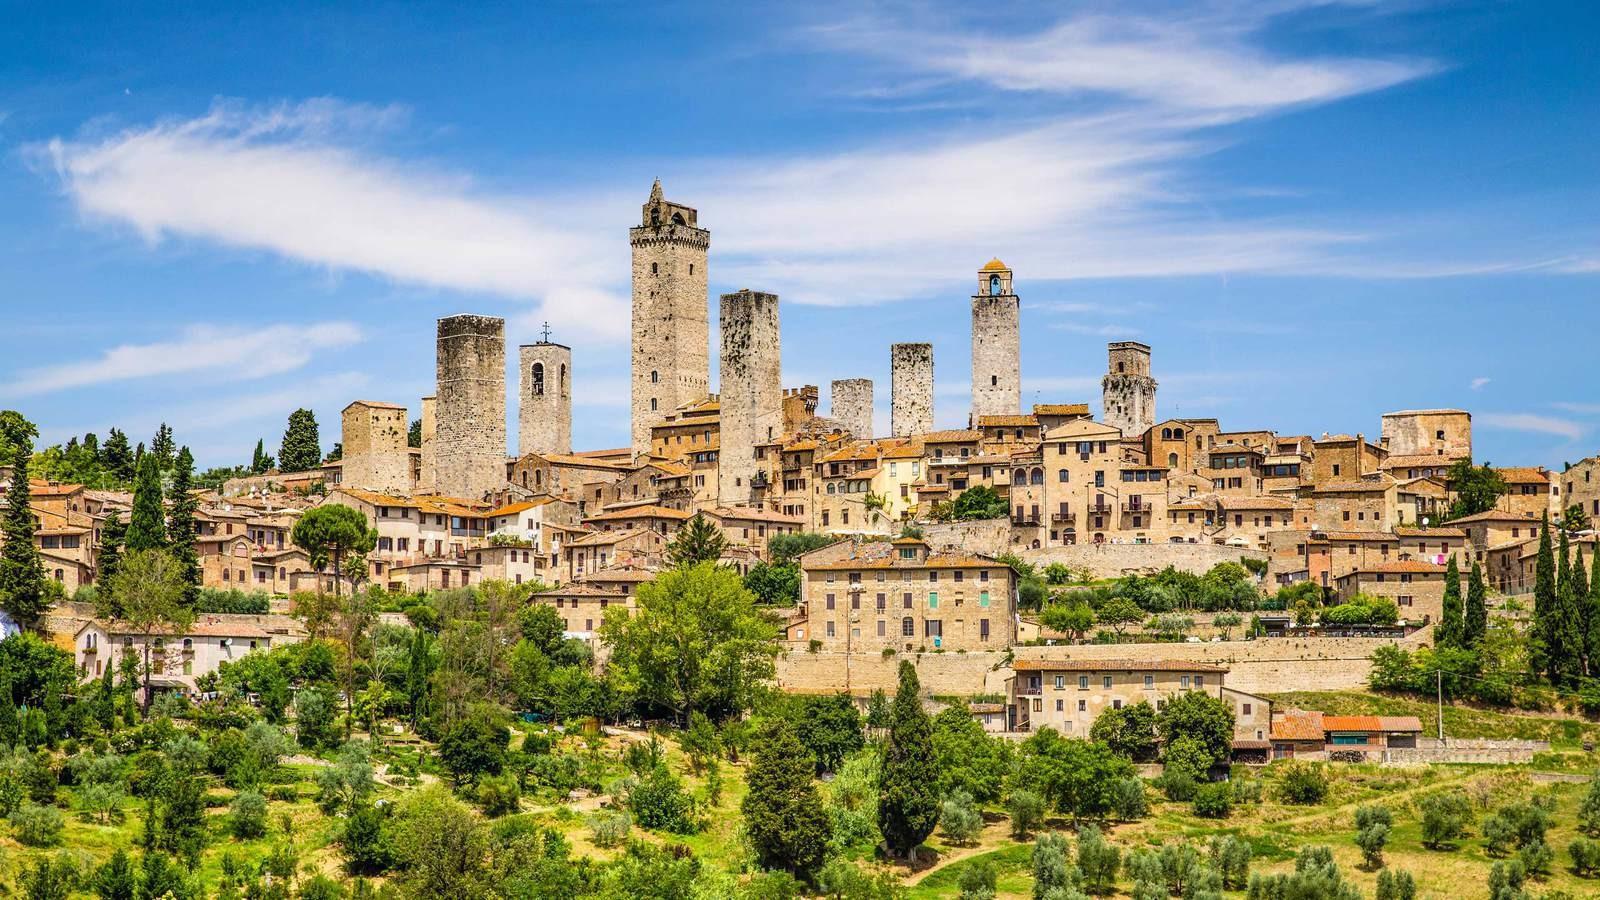 TUSCANY IN A DAY, Visit to Pisa, San Gimignano and Siena With